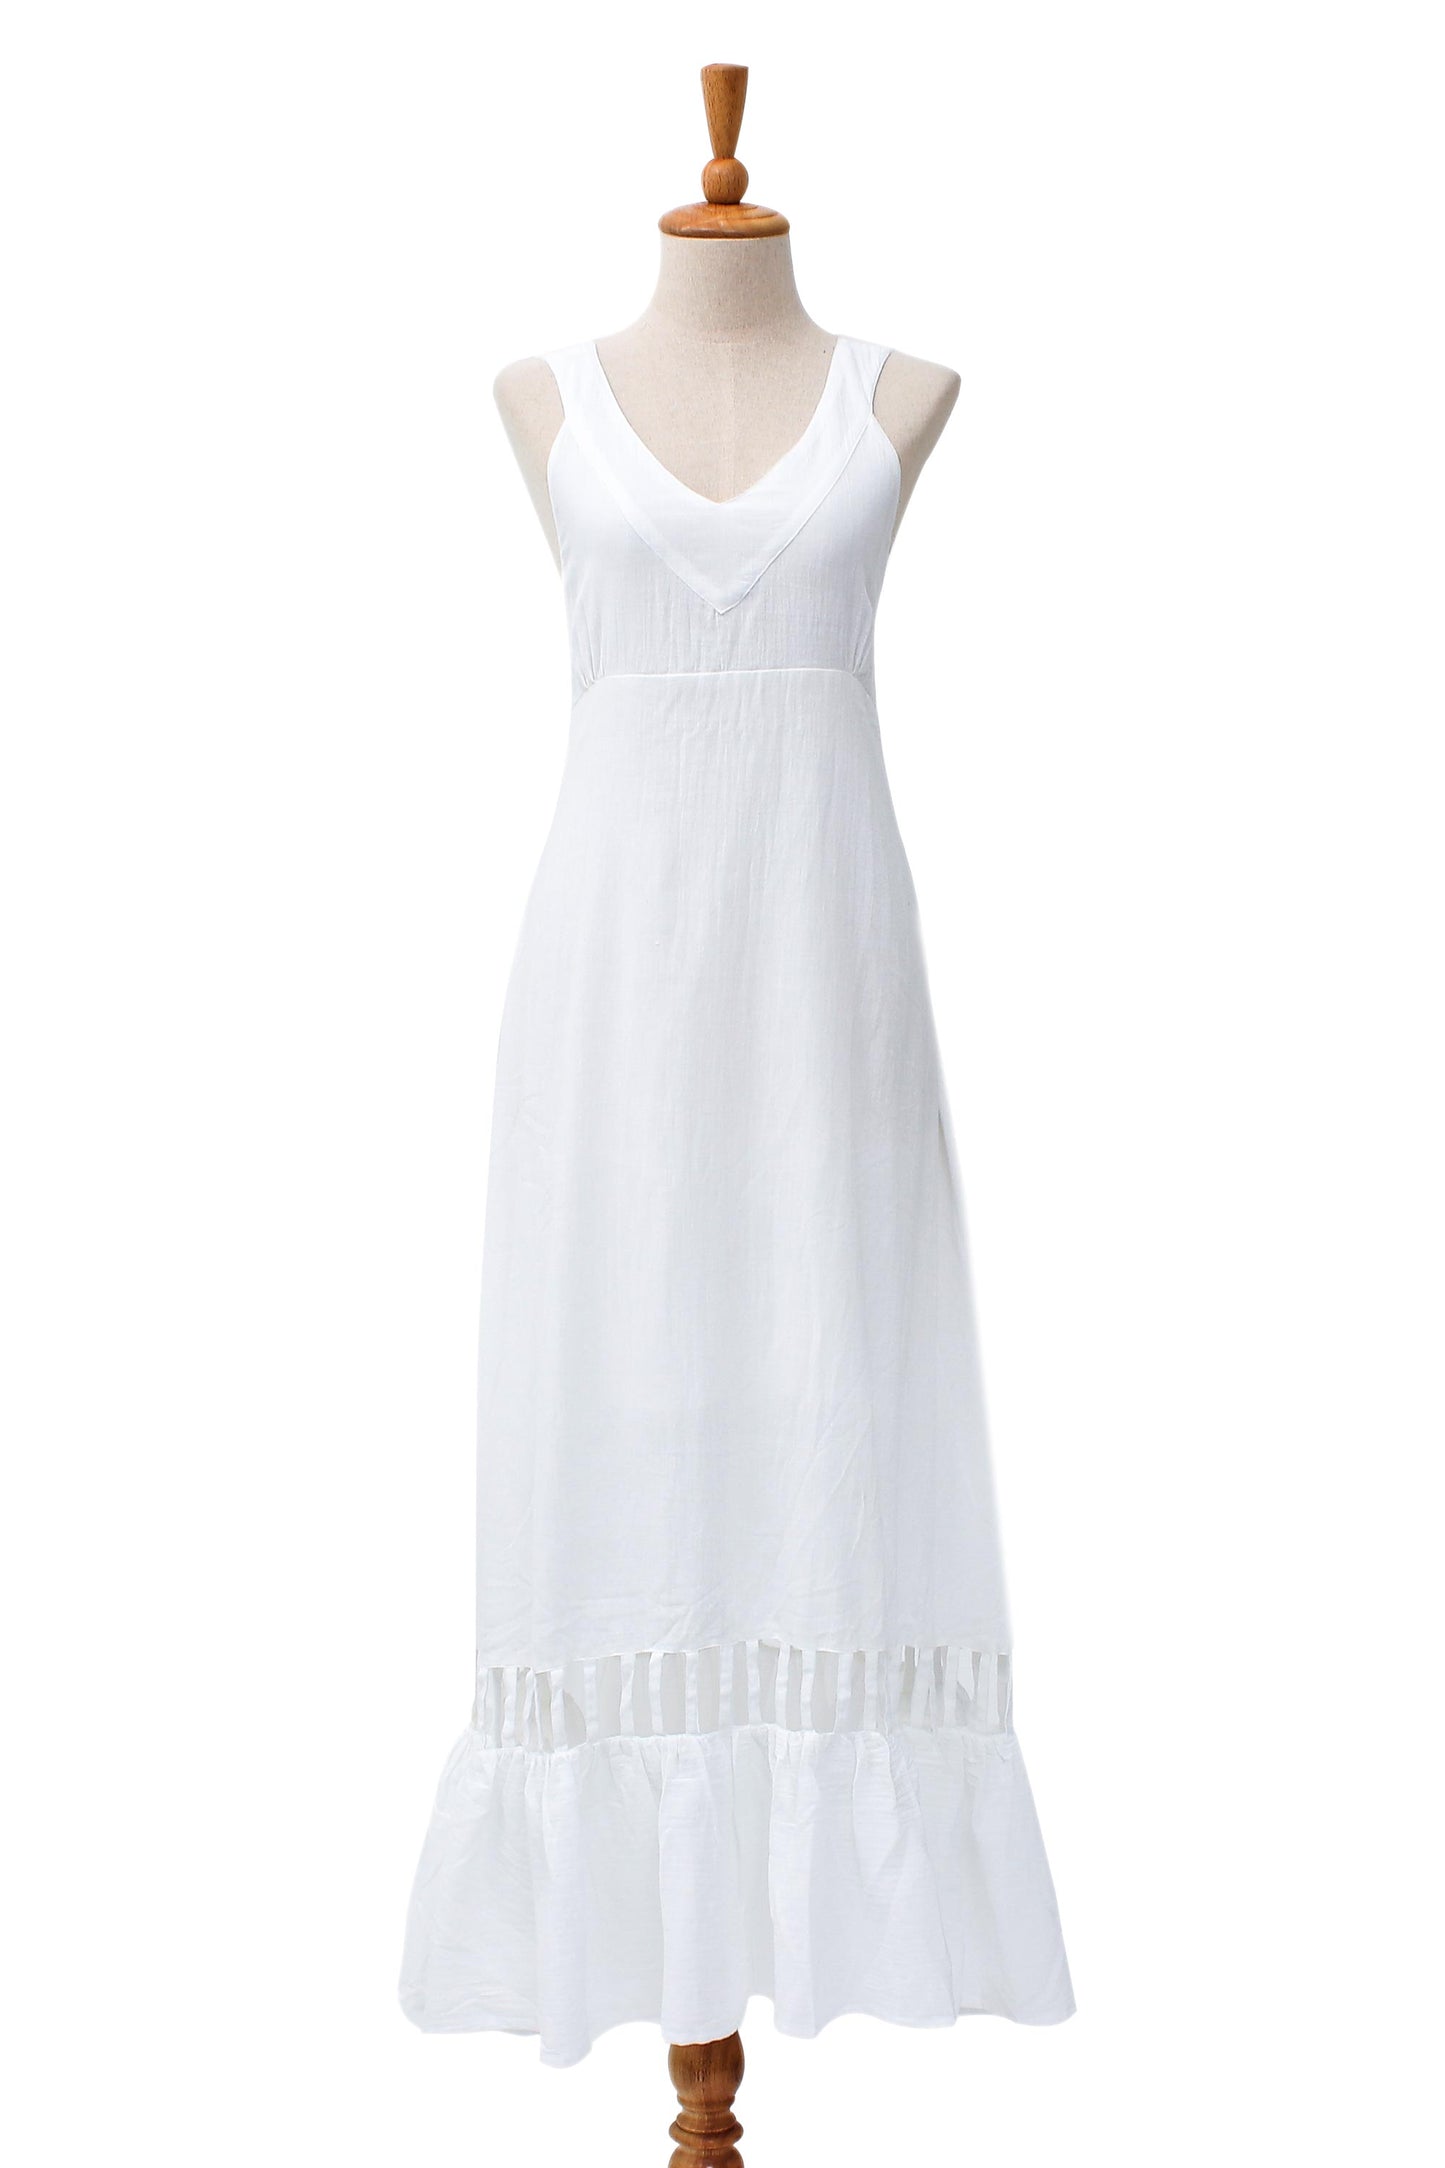 Soiree in White Hand Crafted White Cotton Sundress